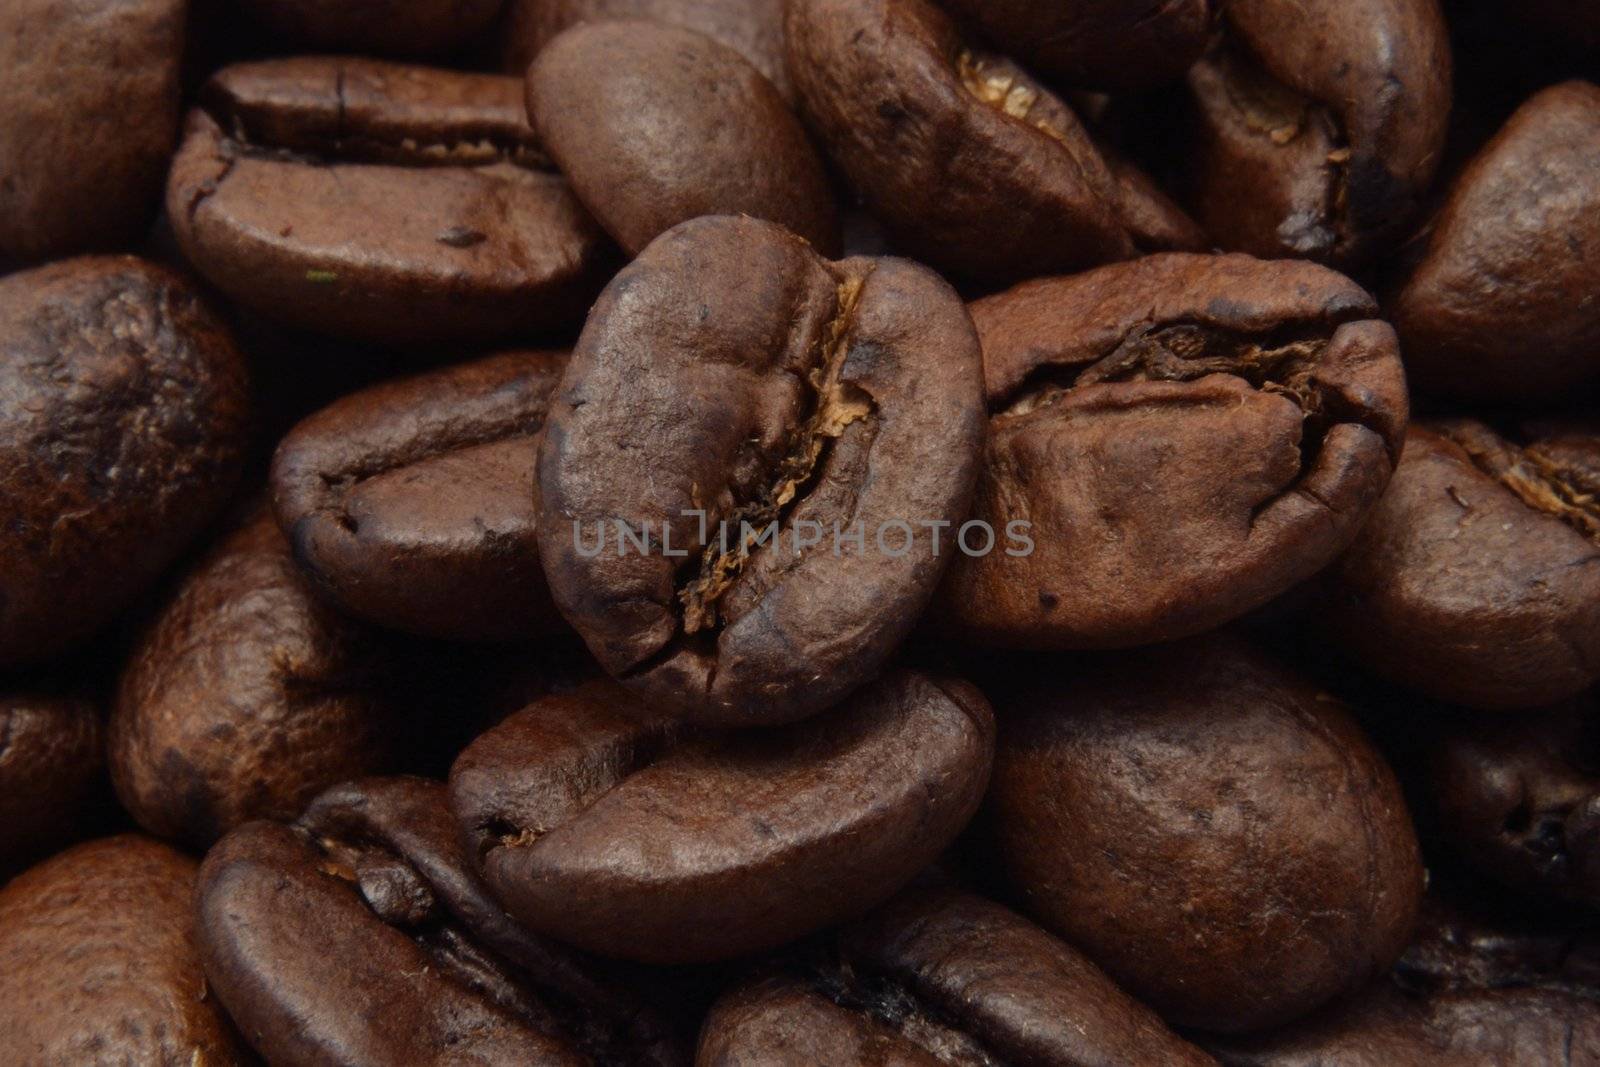 The coffee background by Autre